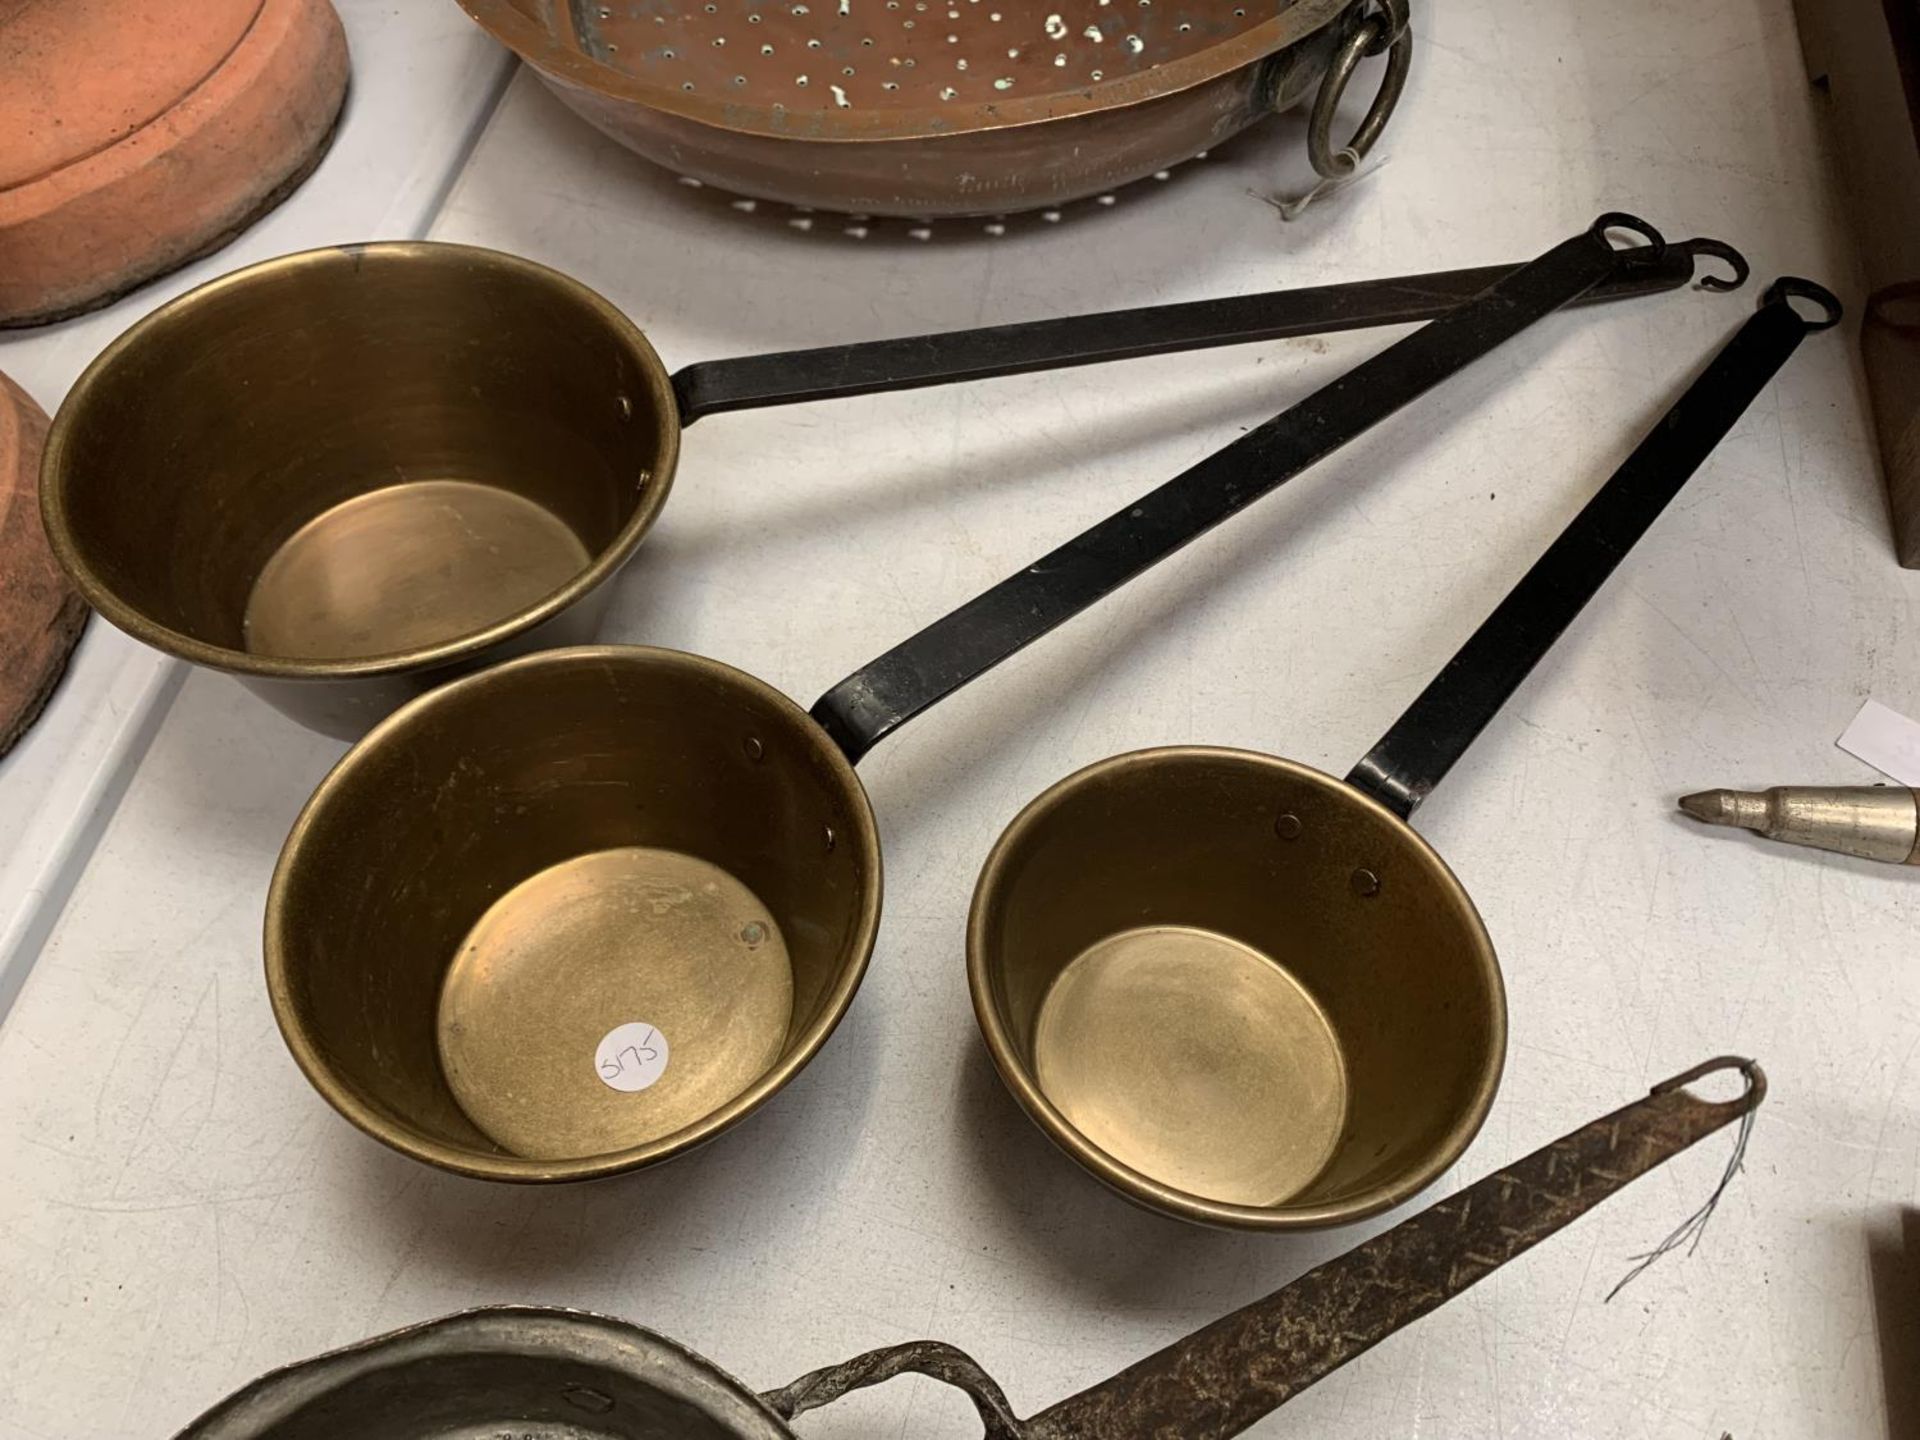 VARIOUS VINTAGE BRASS AND COPPER WARE TO INCLUDE A LARGE COLANDER, A TRIO OF BRASS PANS WITH IRON - Image 3 of 4